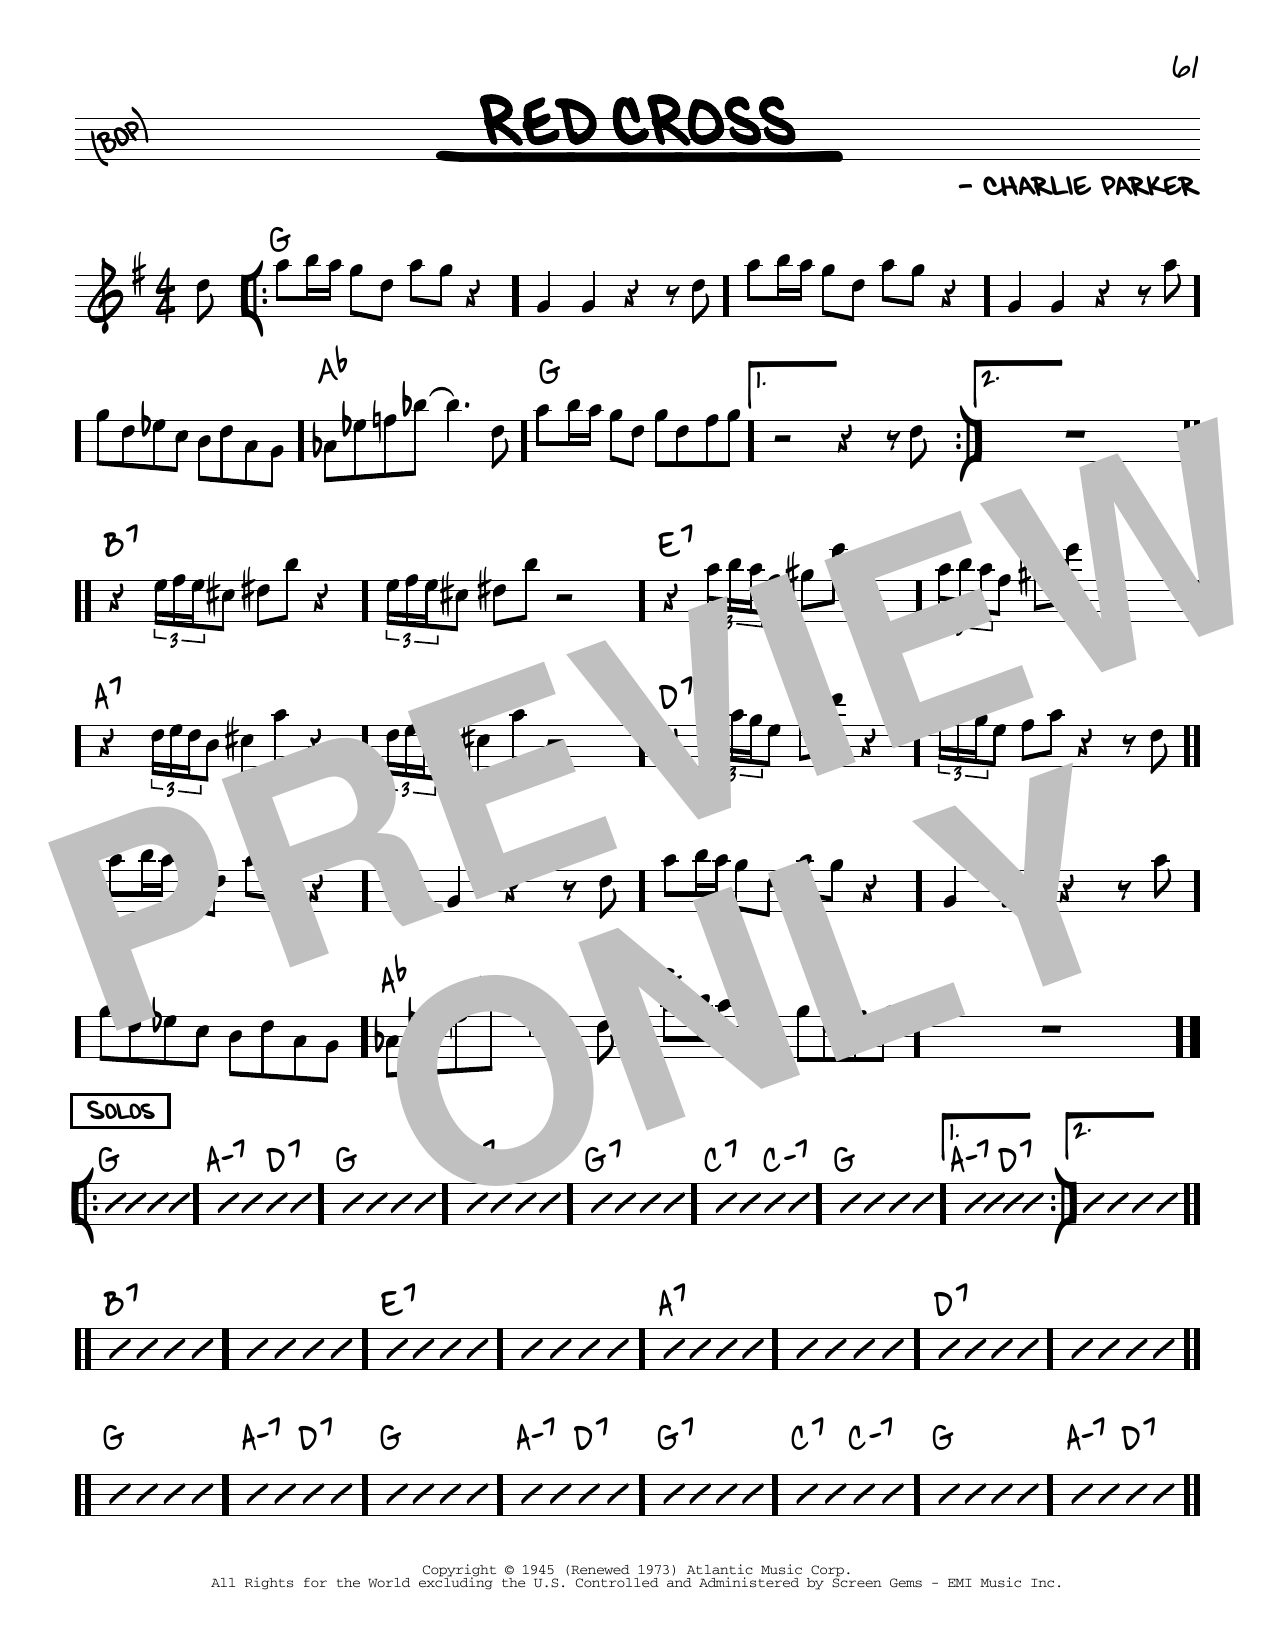 Charlie Parker Red Cross sheet music notes and chords. Download Printable PDF.